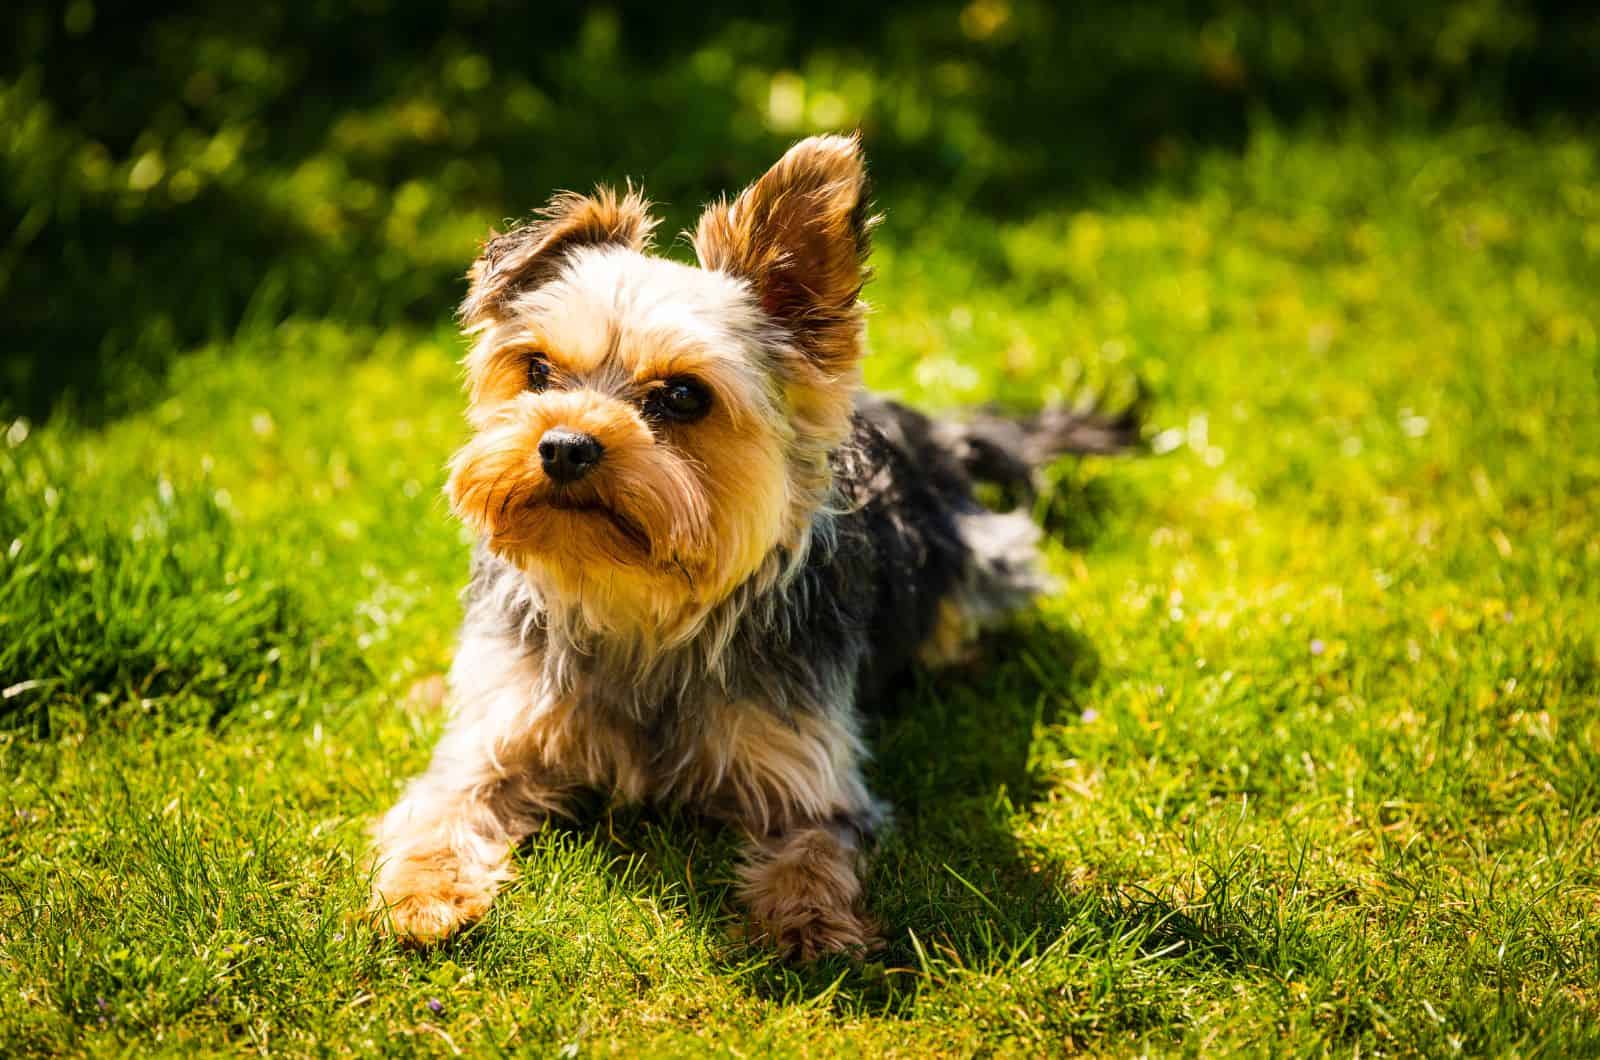 Yorkie playing on grass